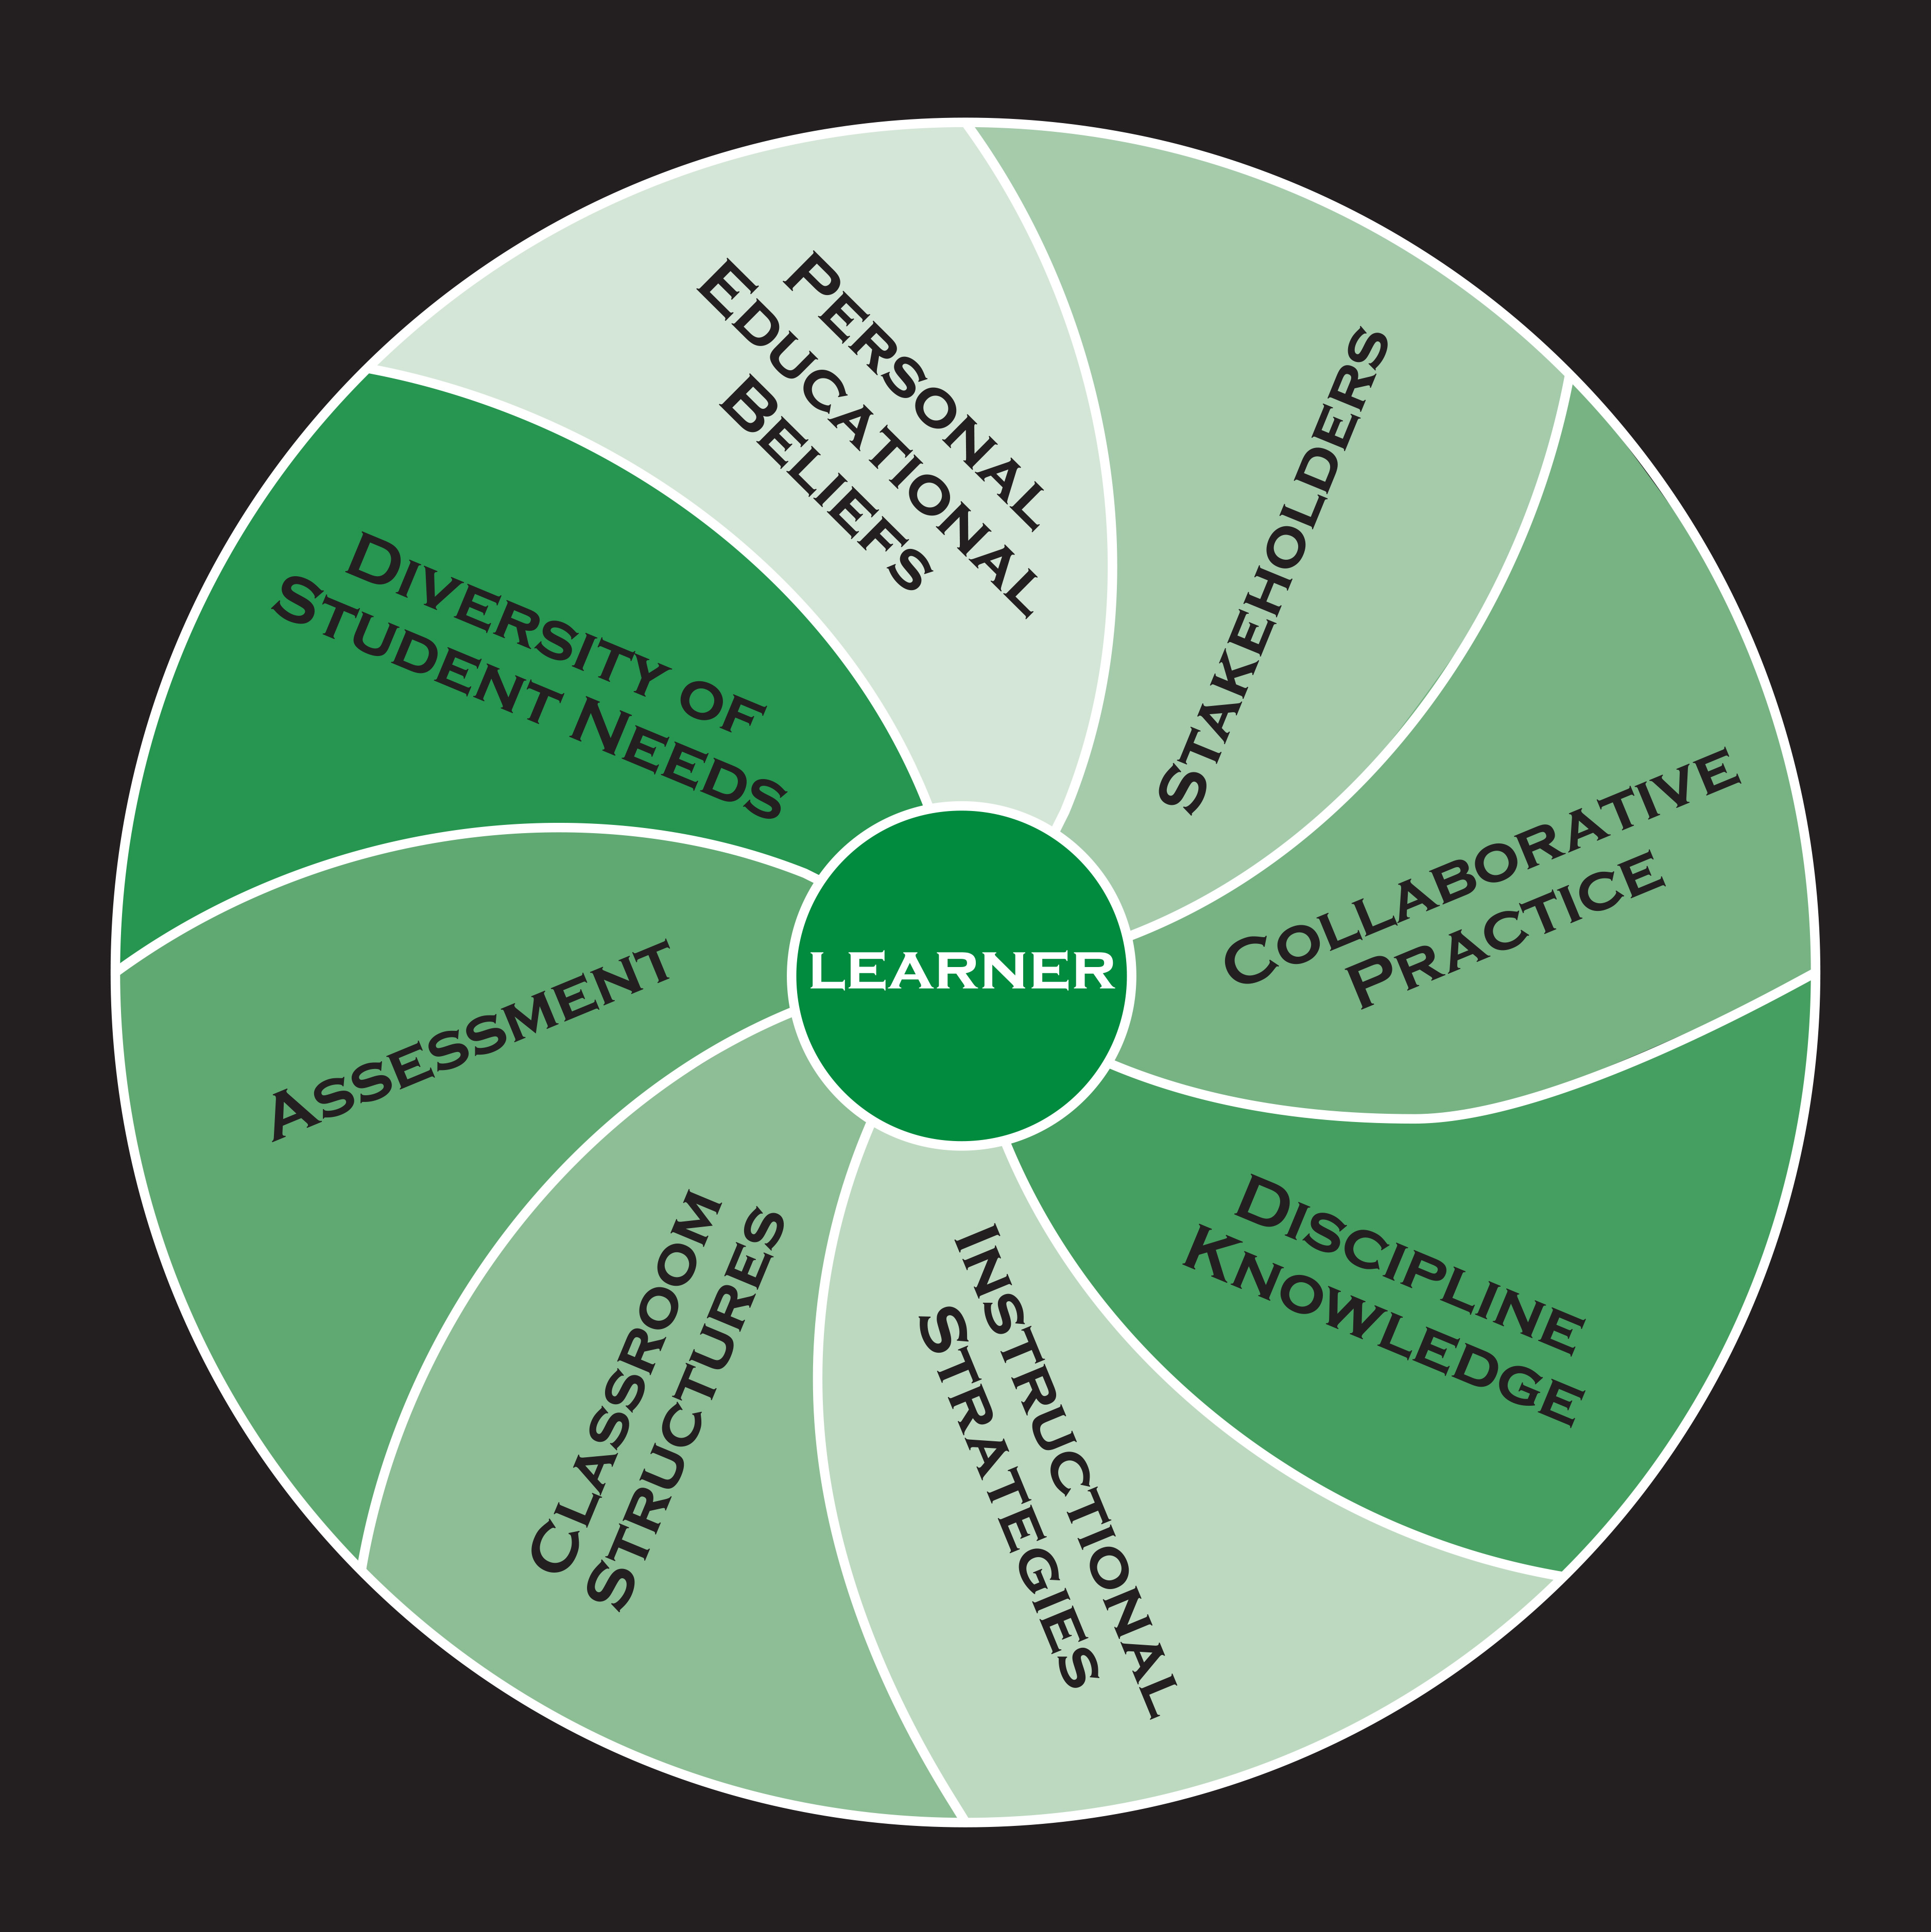 A graphic image depicting the learner in a circle in the middle. Surrounding the learner in equal sections are Stakeholders, Collaborative Practice, Discipline Knowledge, Instructional Strategies, Classroom Structures, Assessment, Diversity of Student Needs, Personal Education Beliefs.